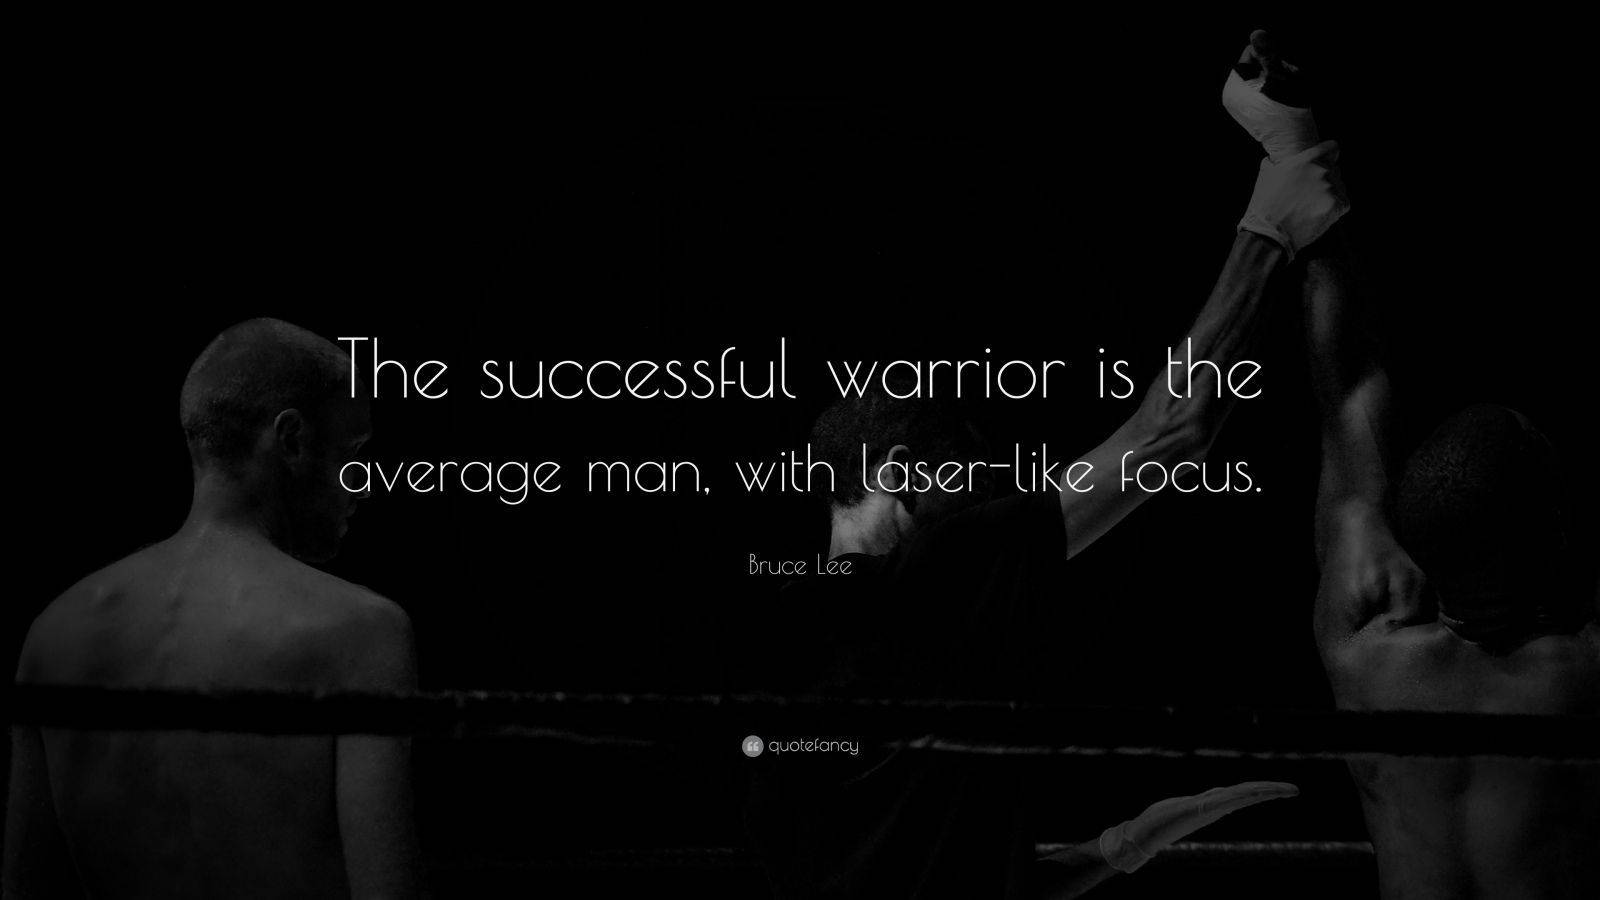 Inspirational Quote By Bruce Lee Wallpaper